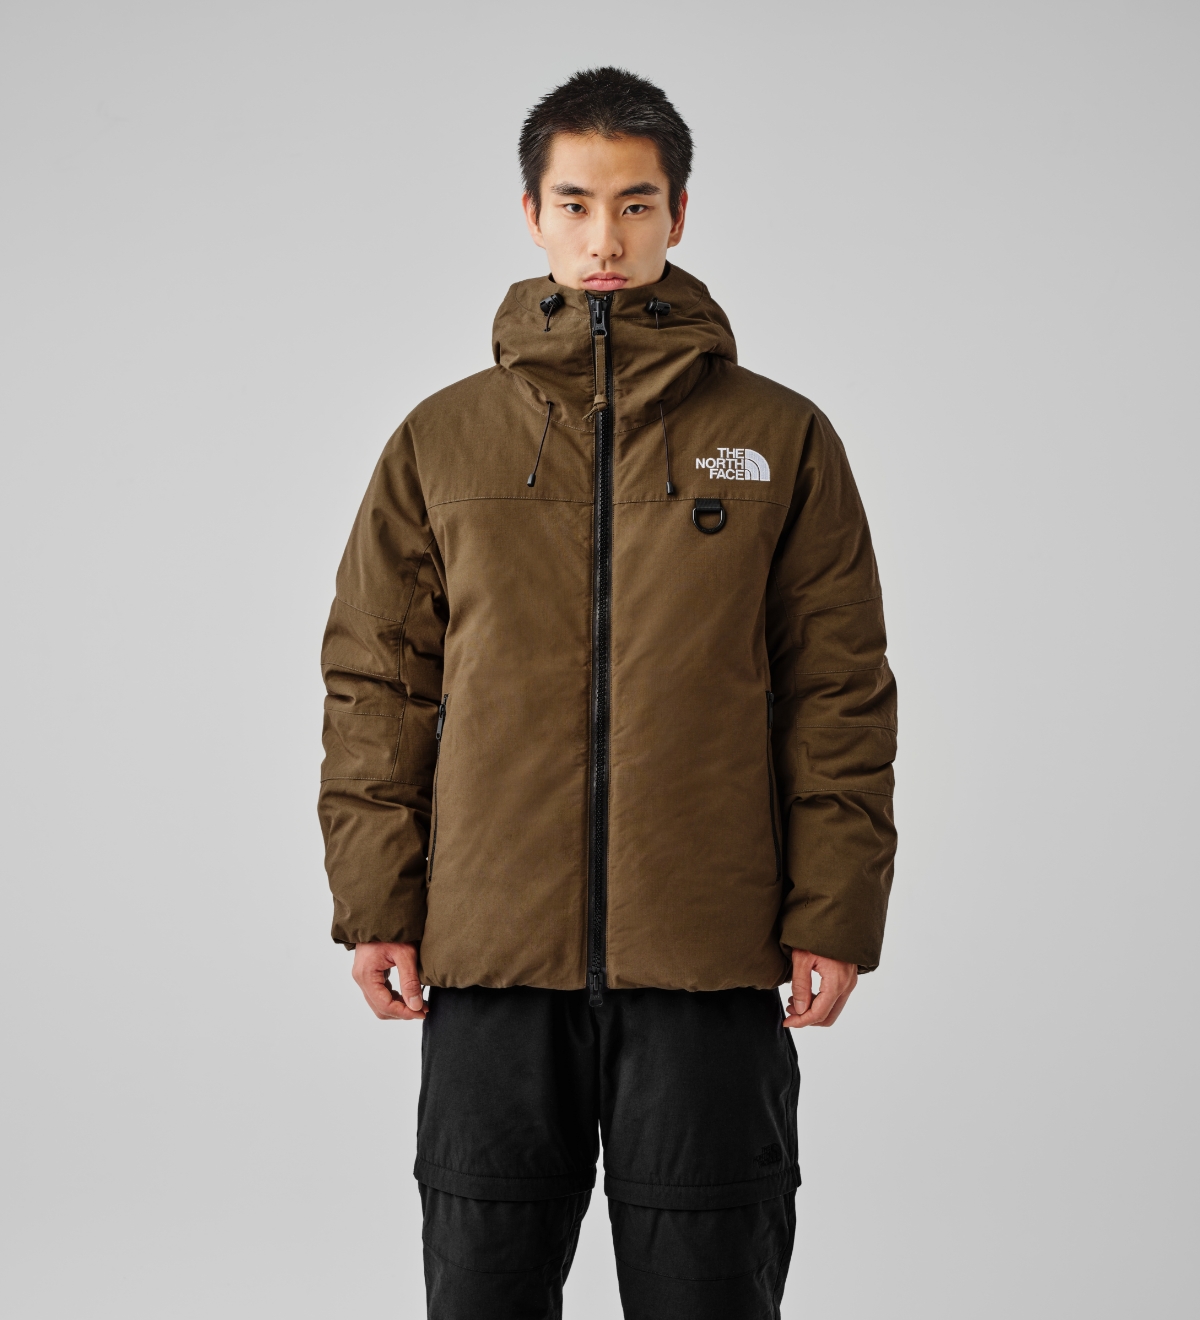 THE NORTH FACE Firefly Insulated Parka L eva.gov.co